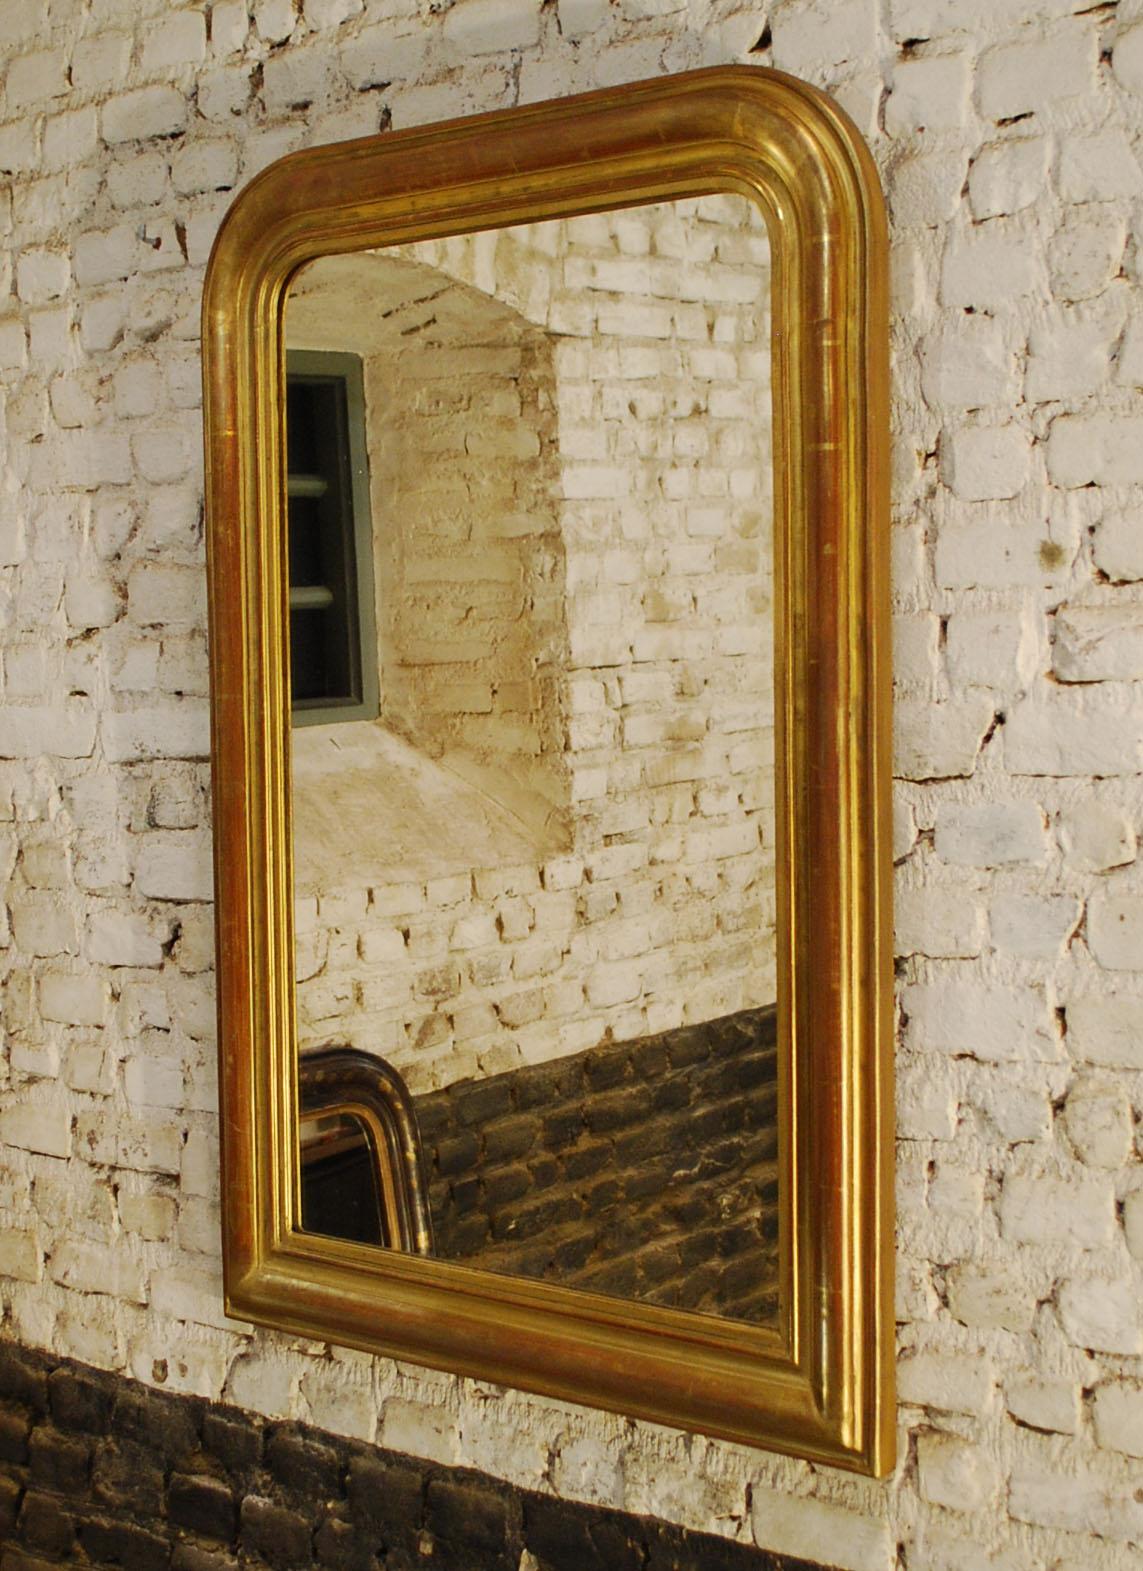 This simple yet elegant mirror was made in France, circa 1880.
It has the upper rounded corners typical for Louis Philippe mirrors. The sleek frame is partially gold gilded and partially gold painted. This was a general practice and provided a way